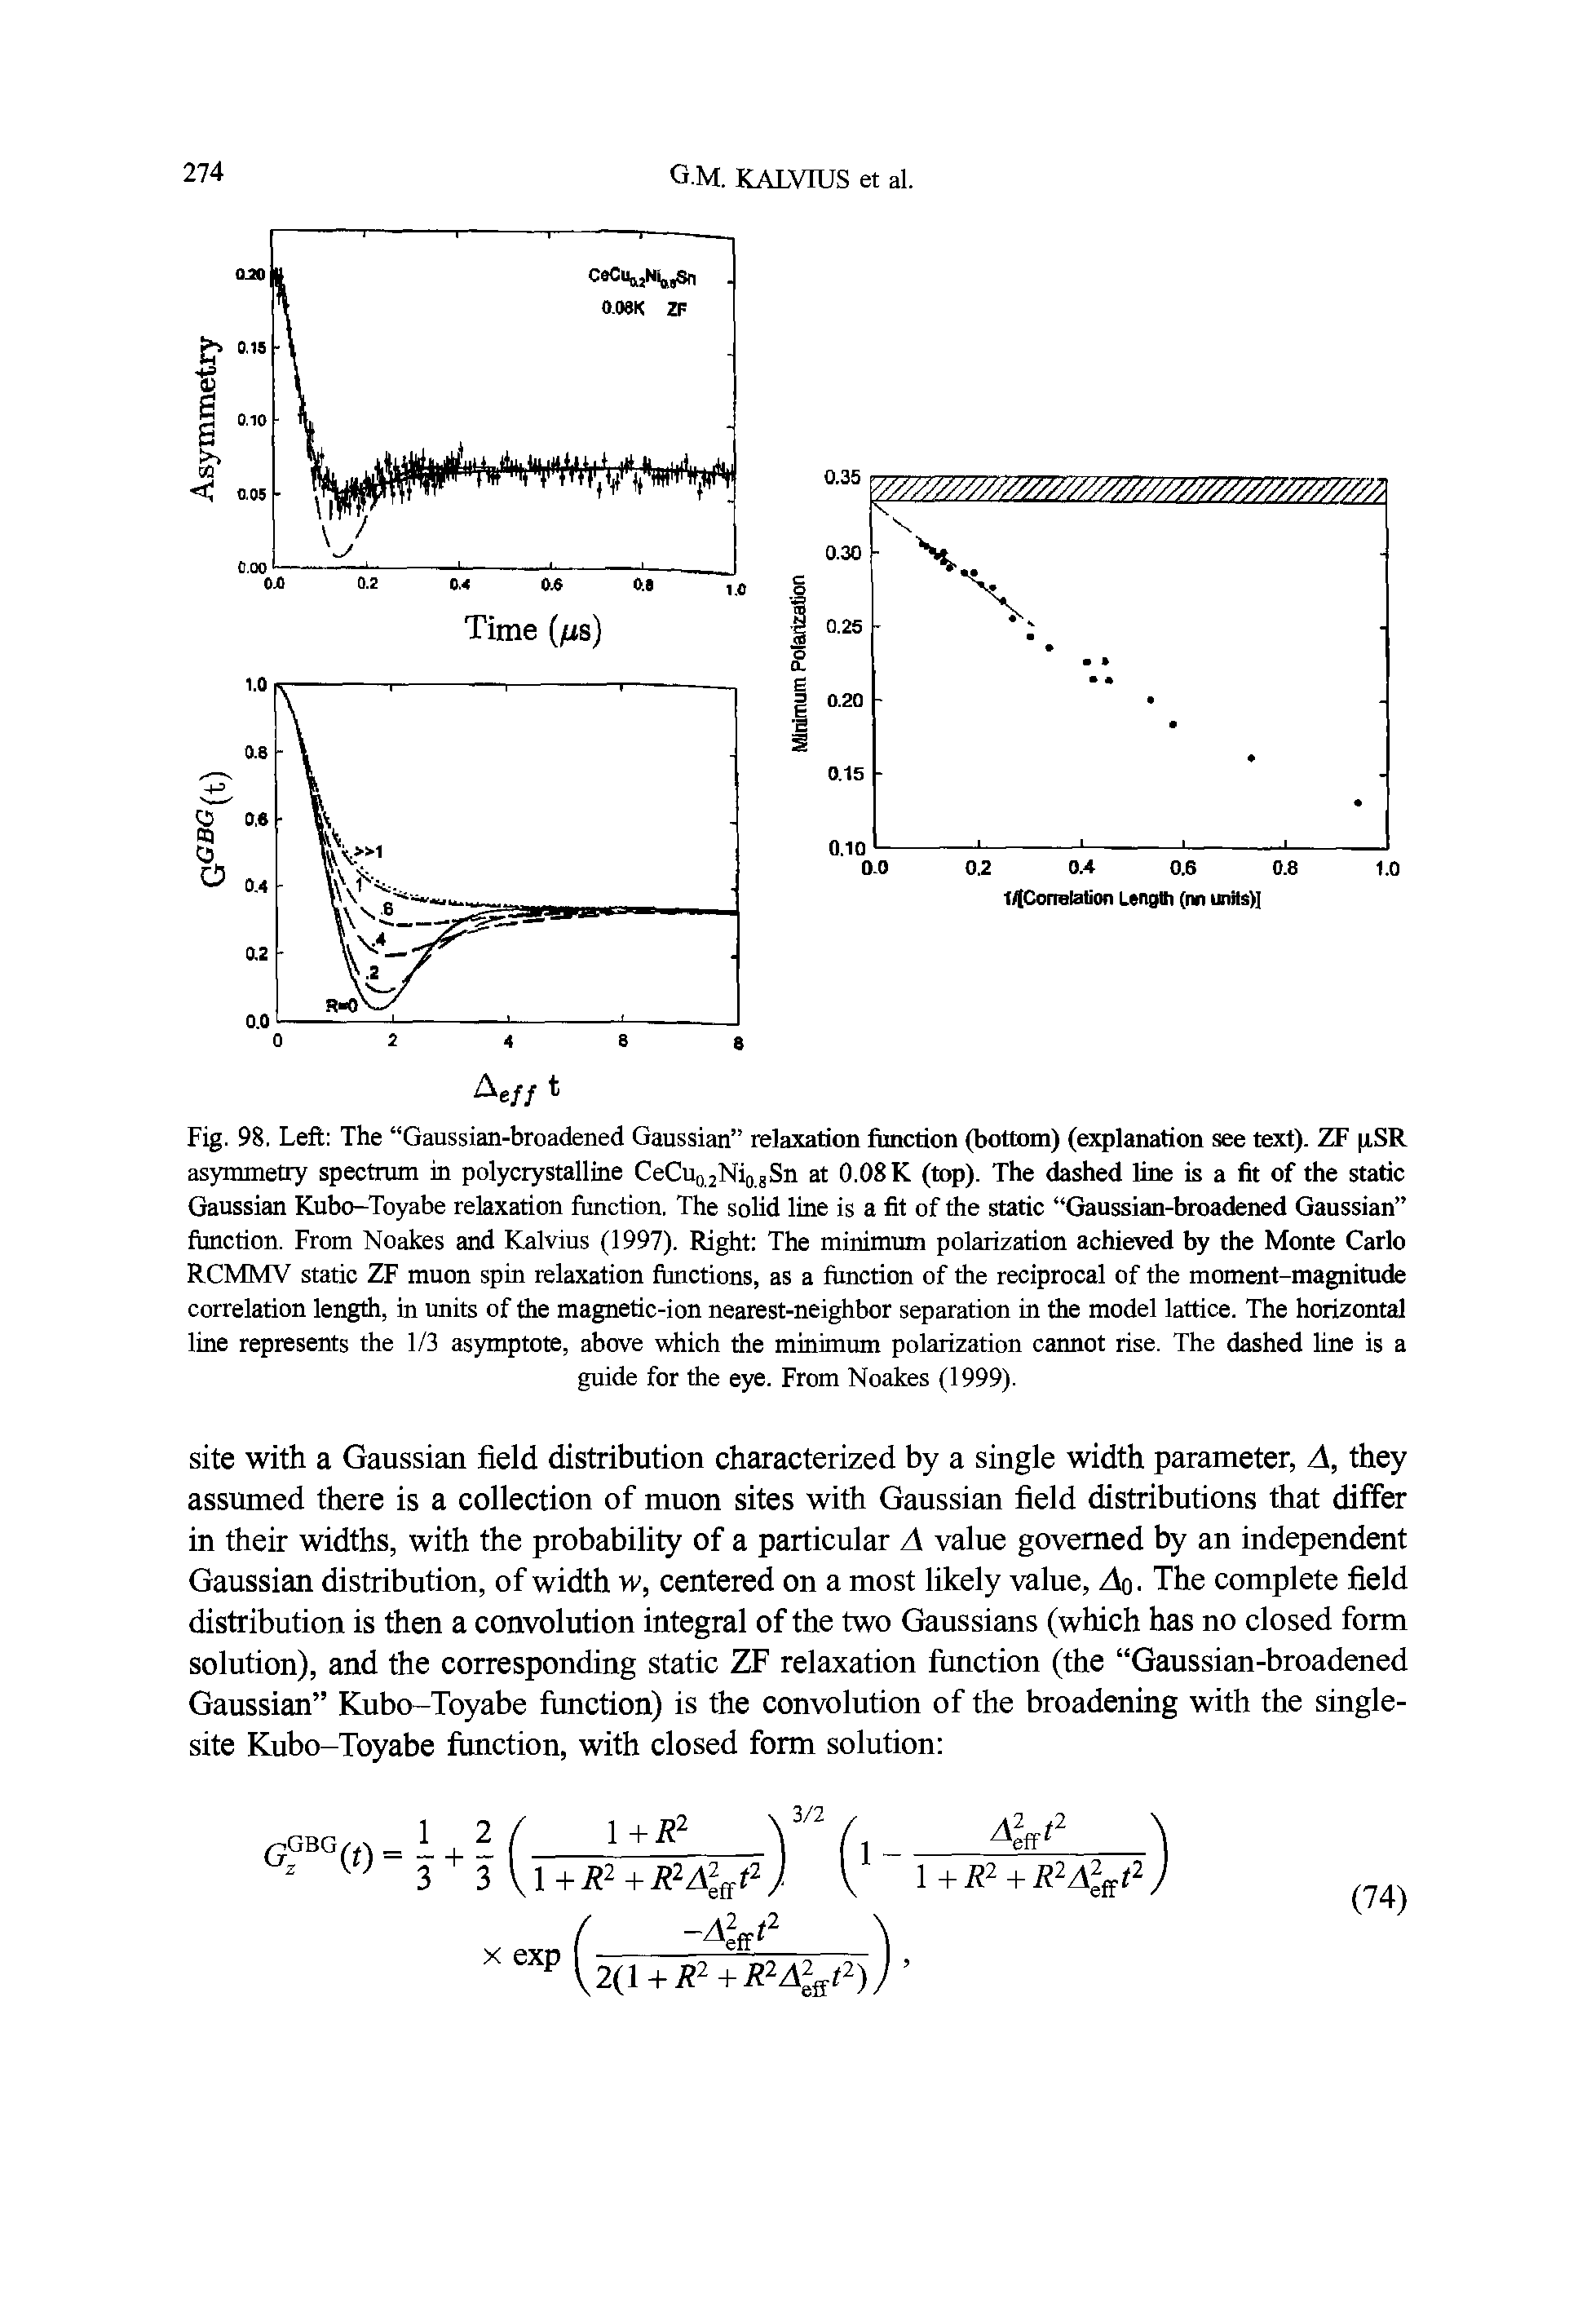 Fig. 98. Left The Gaussian-broadened Gaussian relaxation fimction (bottom) (explanation see text). ZF pSR asymmetry spectrum in polycrystalline CeCuo2Nio.jSn at 0.08K (top). The dashed line is a fit of the static Gaussian Kubo-Toyabe relaxation function. The solid line is a fit of the static Gaussian-broadened Gaussian function. From Noakes and Kalvius (1997). Right The minimum polarization achieved by the Monte Carlo RCMMV static ZF muon spin relaxation functions, as a function of the reciprocal of the moment-magnitude correlation length, in units of the magnetic-ion nearest-neighbor separation in the model lattice. The horizontal line represents the 1/3 asymptote, above which the minimum polarization cannot rise. The dashed line is a...